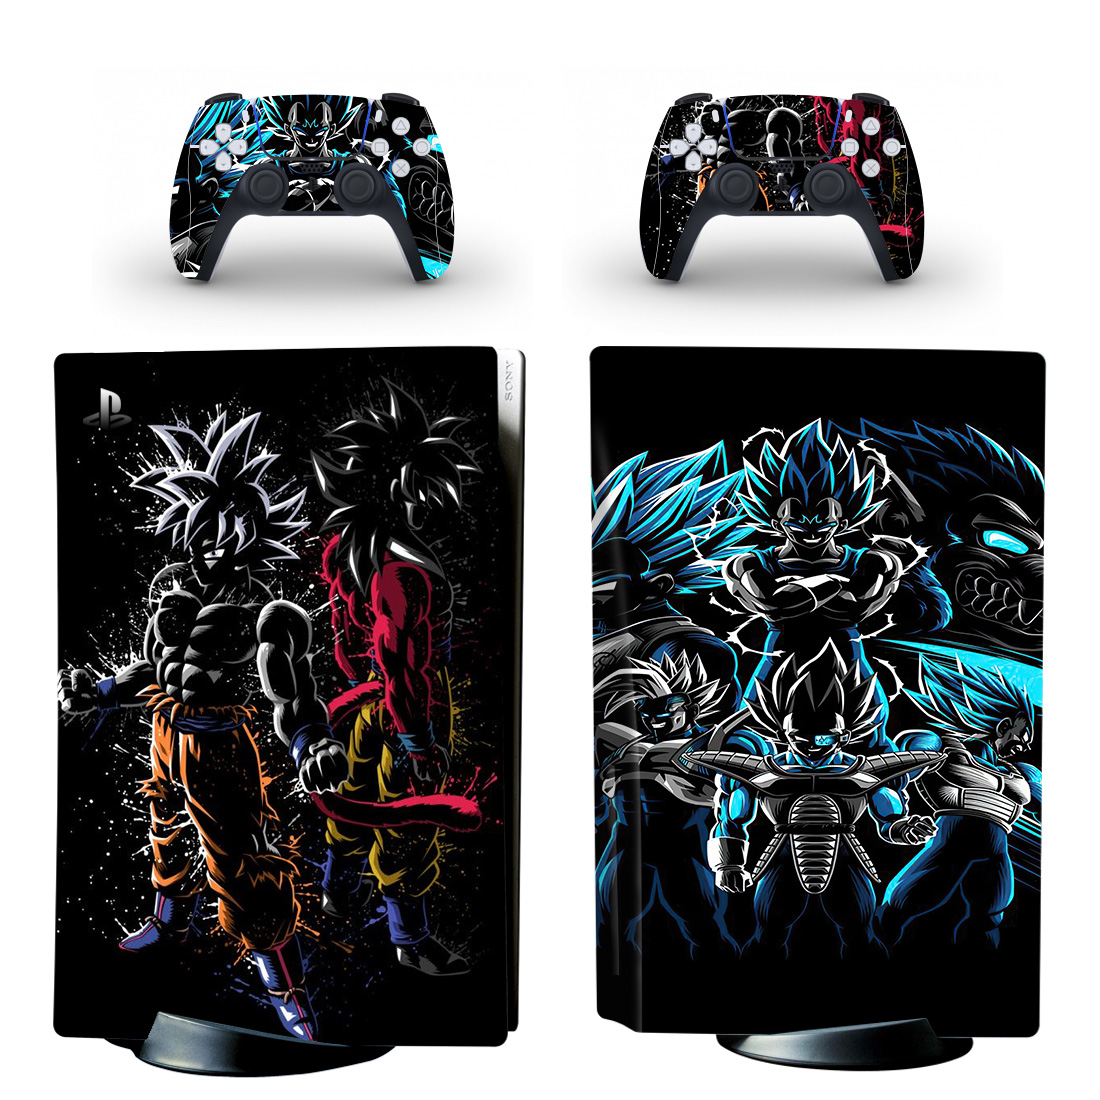 Dragon Ball Z PS5 Skin Sticker For PlayStation 5 And Controllers Design 14